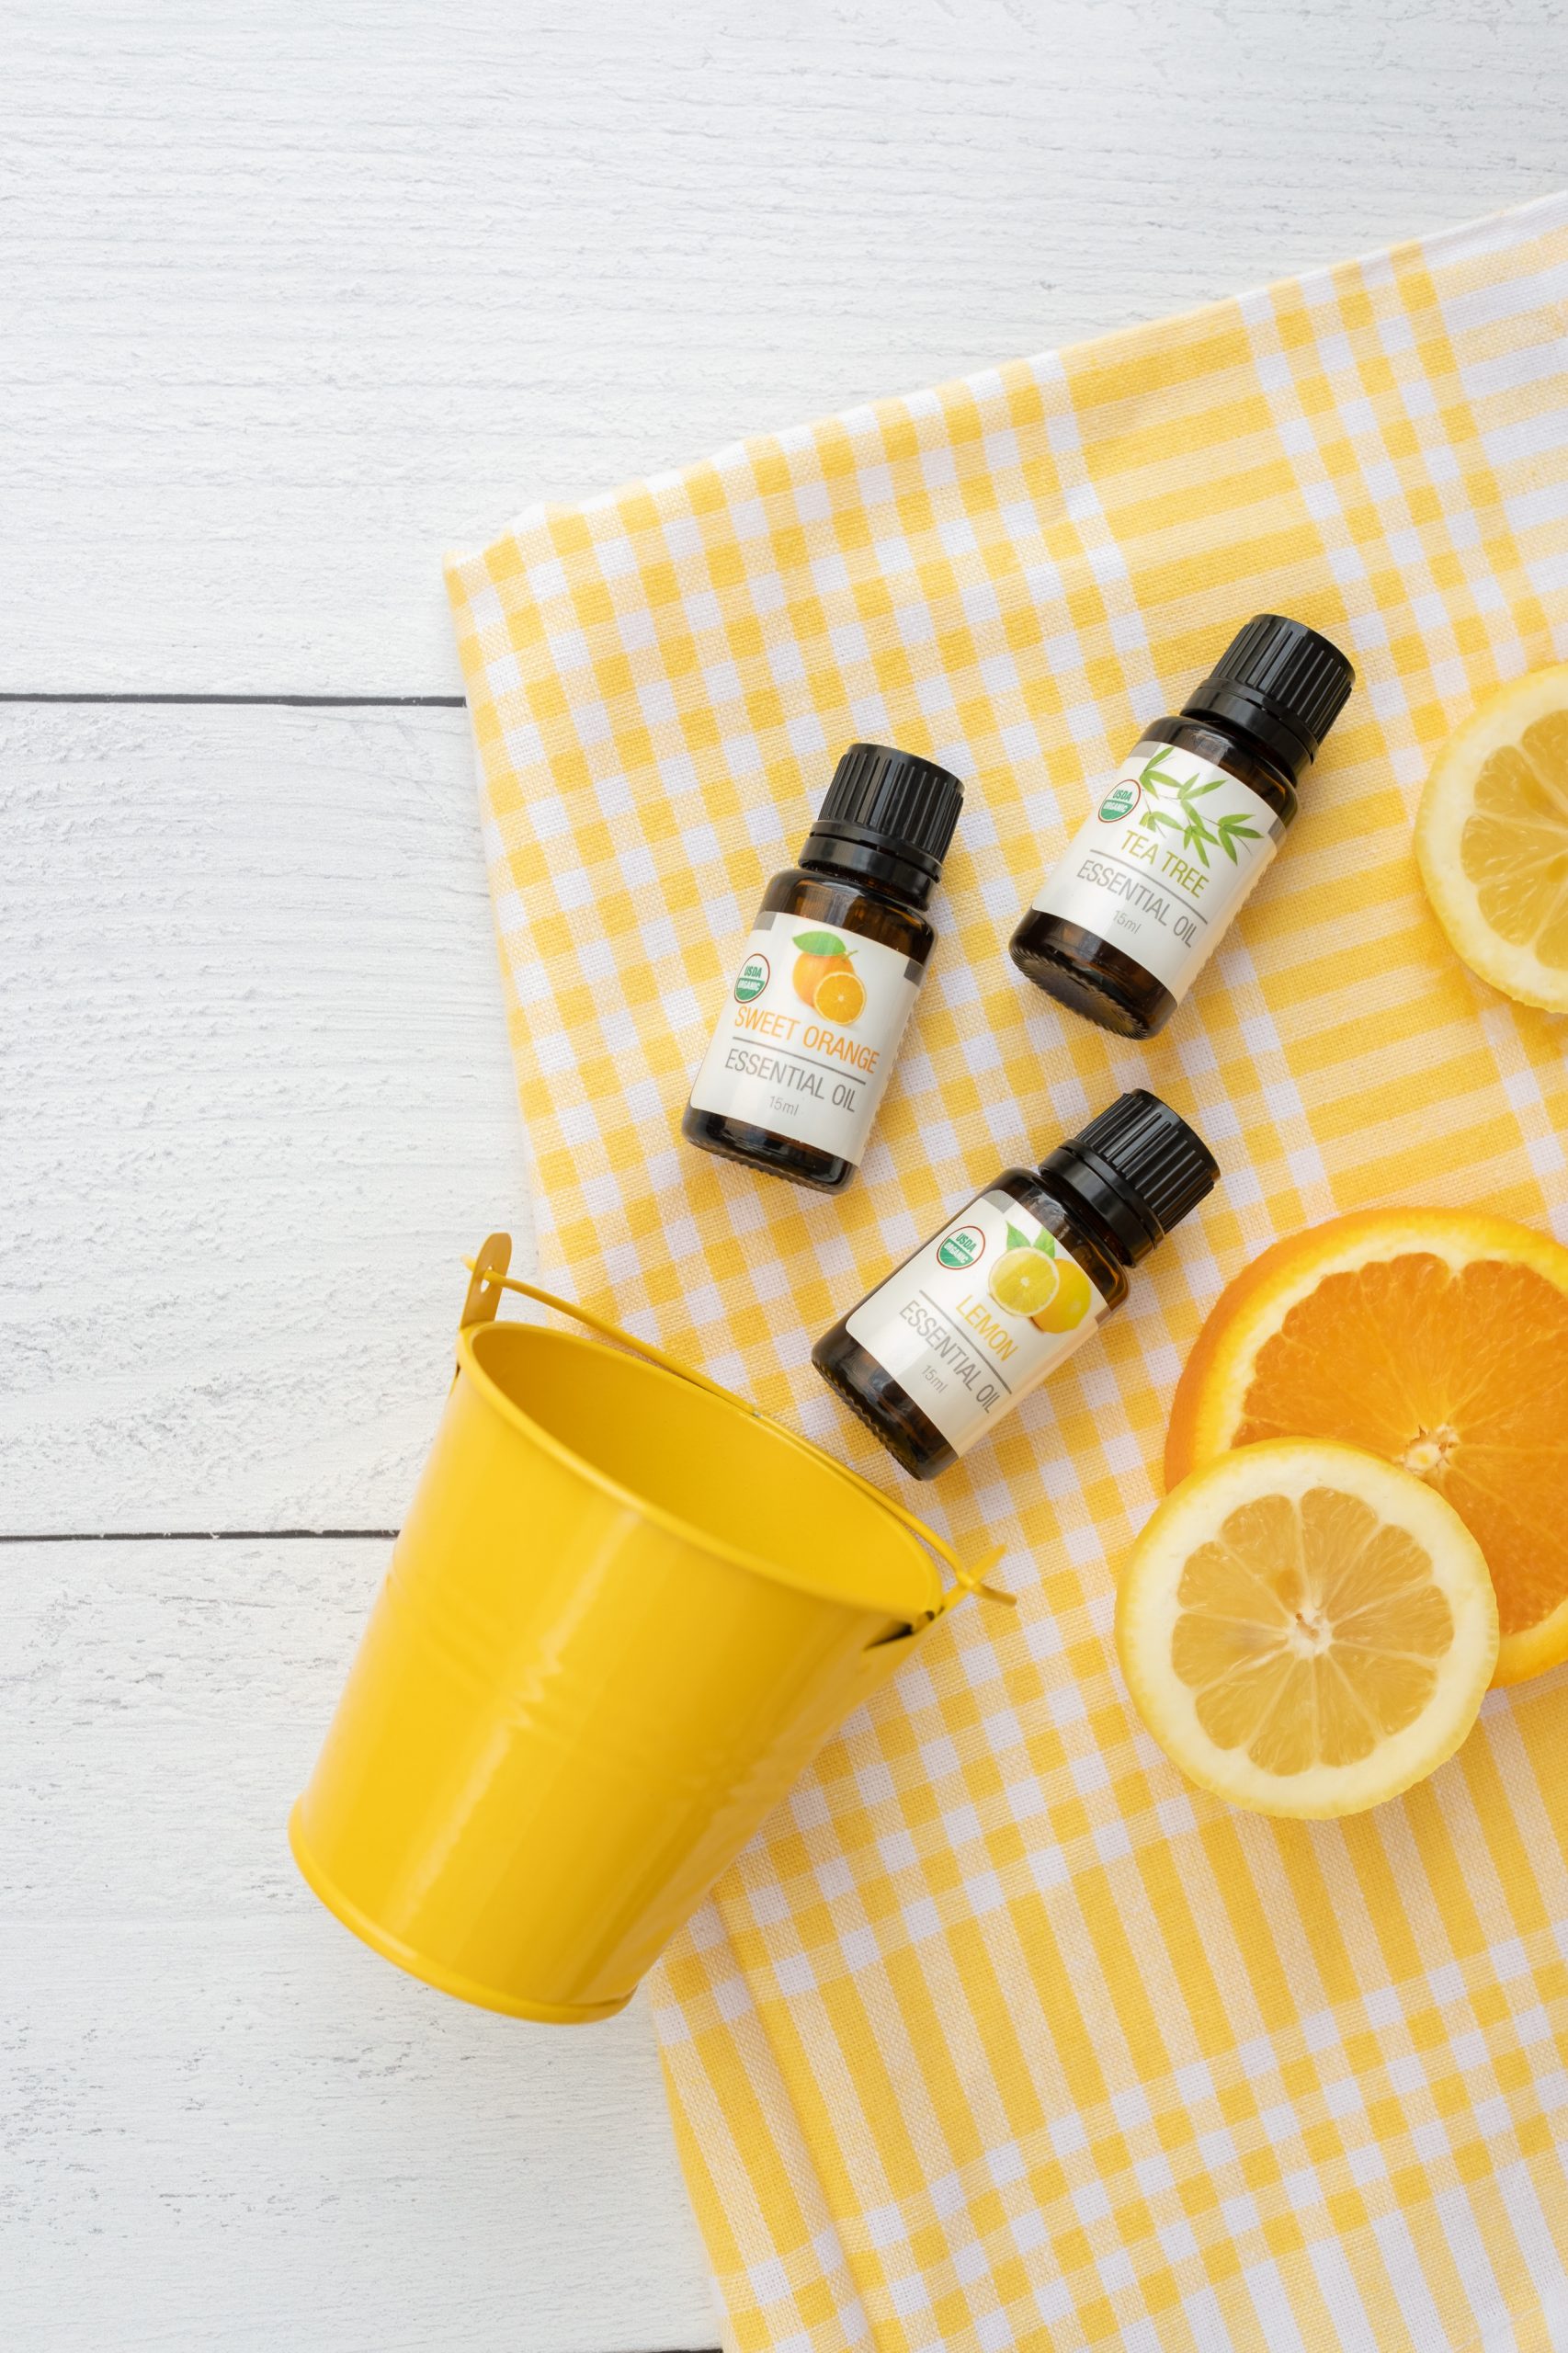 15 Best Sweet Smelling Essential Oil Recipes - A Less Toxic LifeA